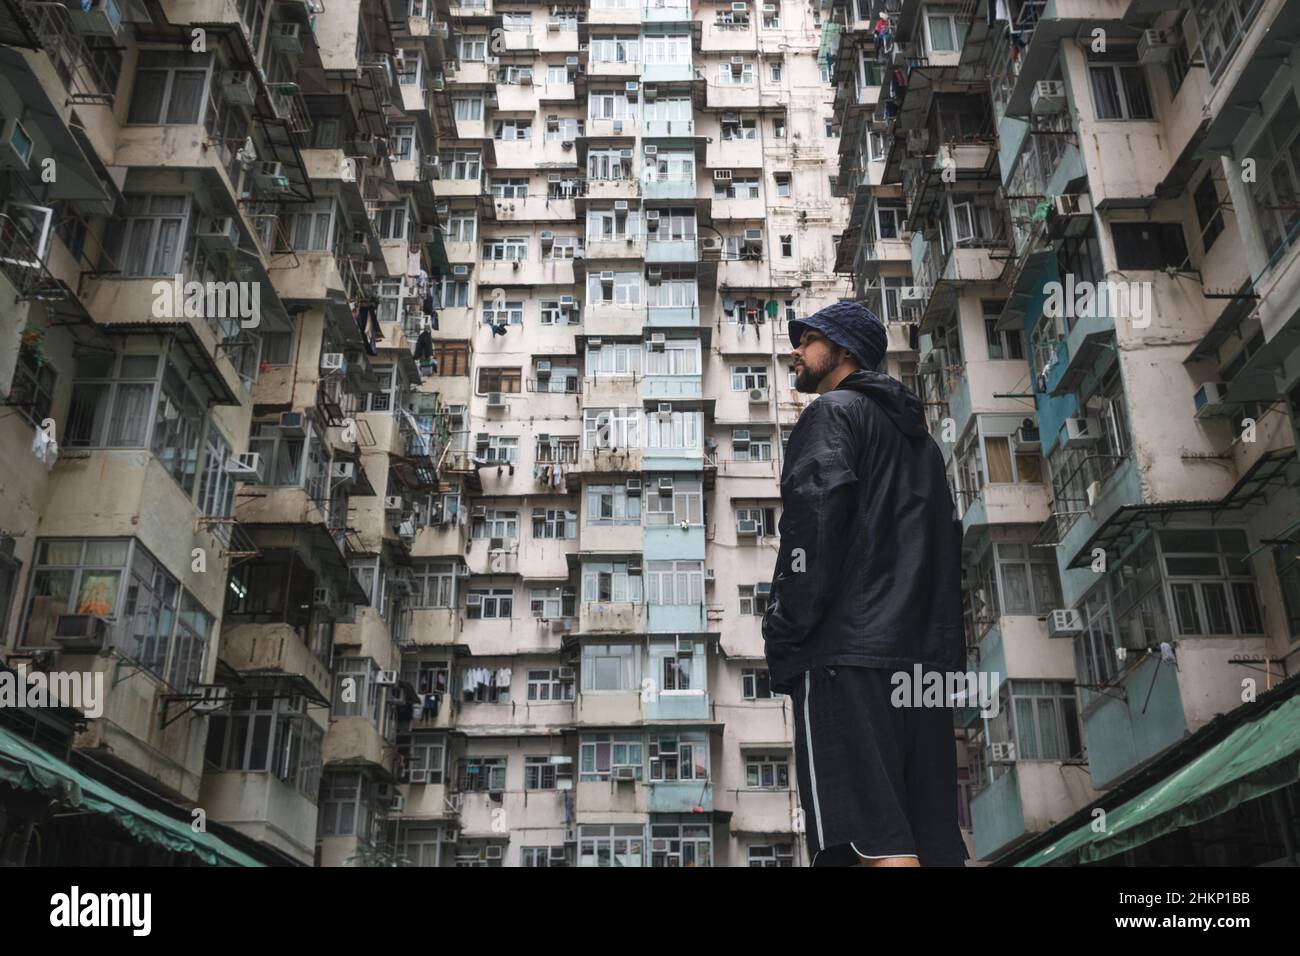 Traveler exploring the urban landscape of Hong Kong, China, one of the most densely populated cities in the world. Stock Photo